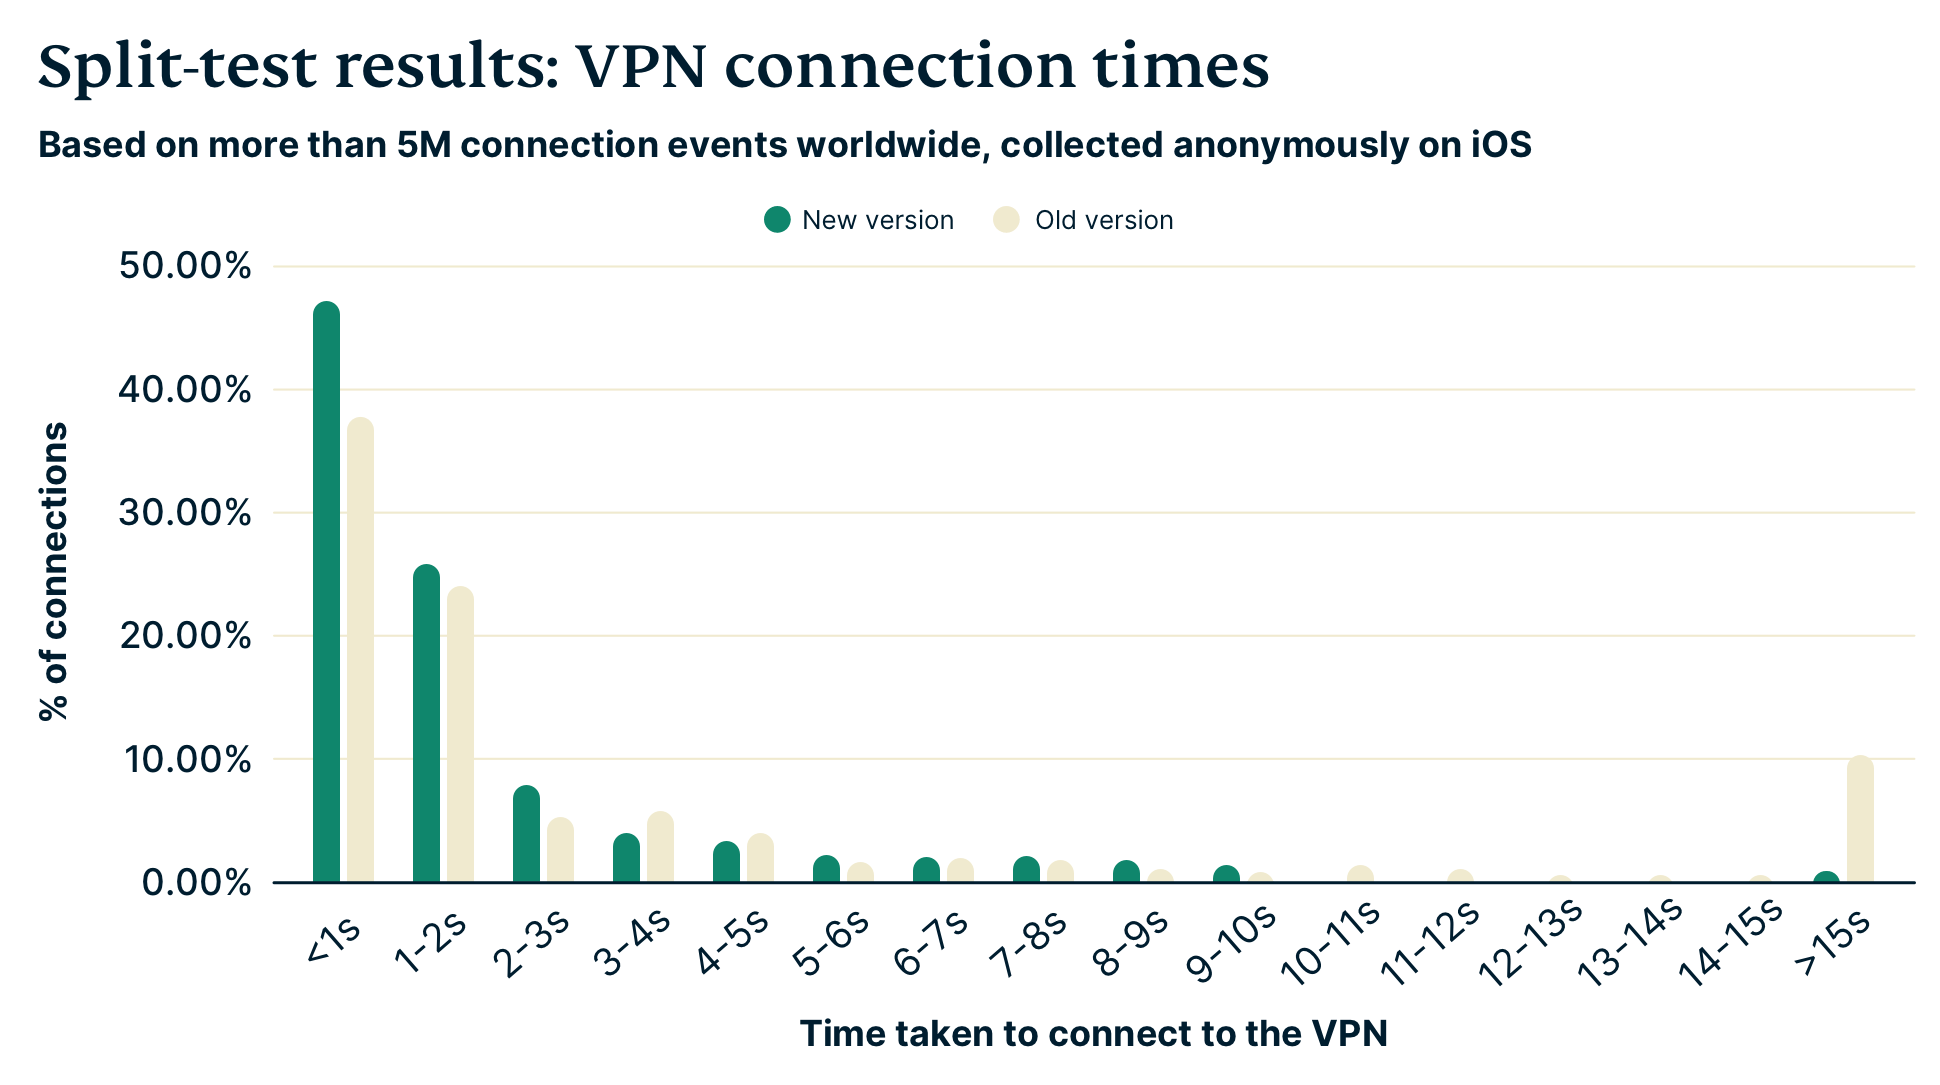 Bar graph of split test results for VPN connection times before and after parallel connections.